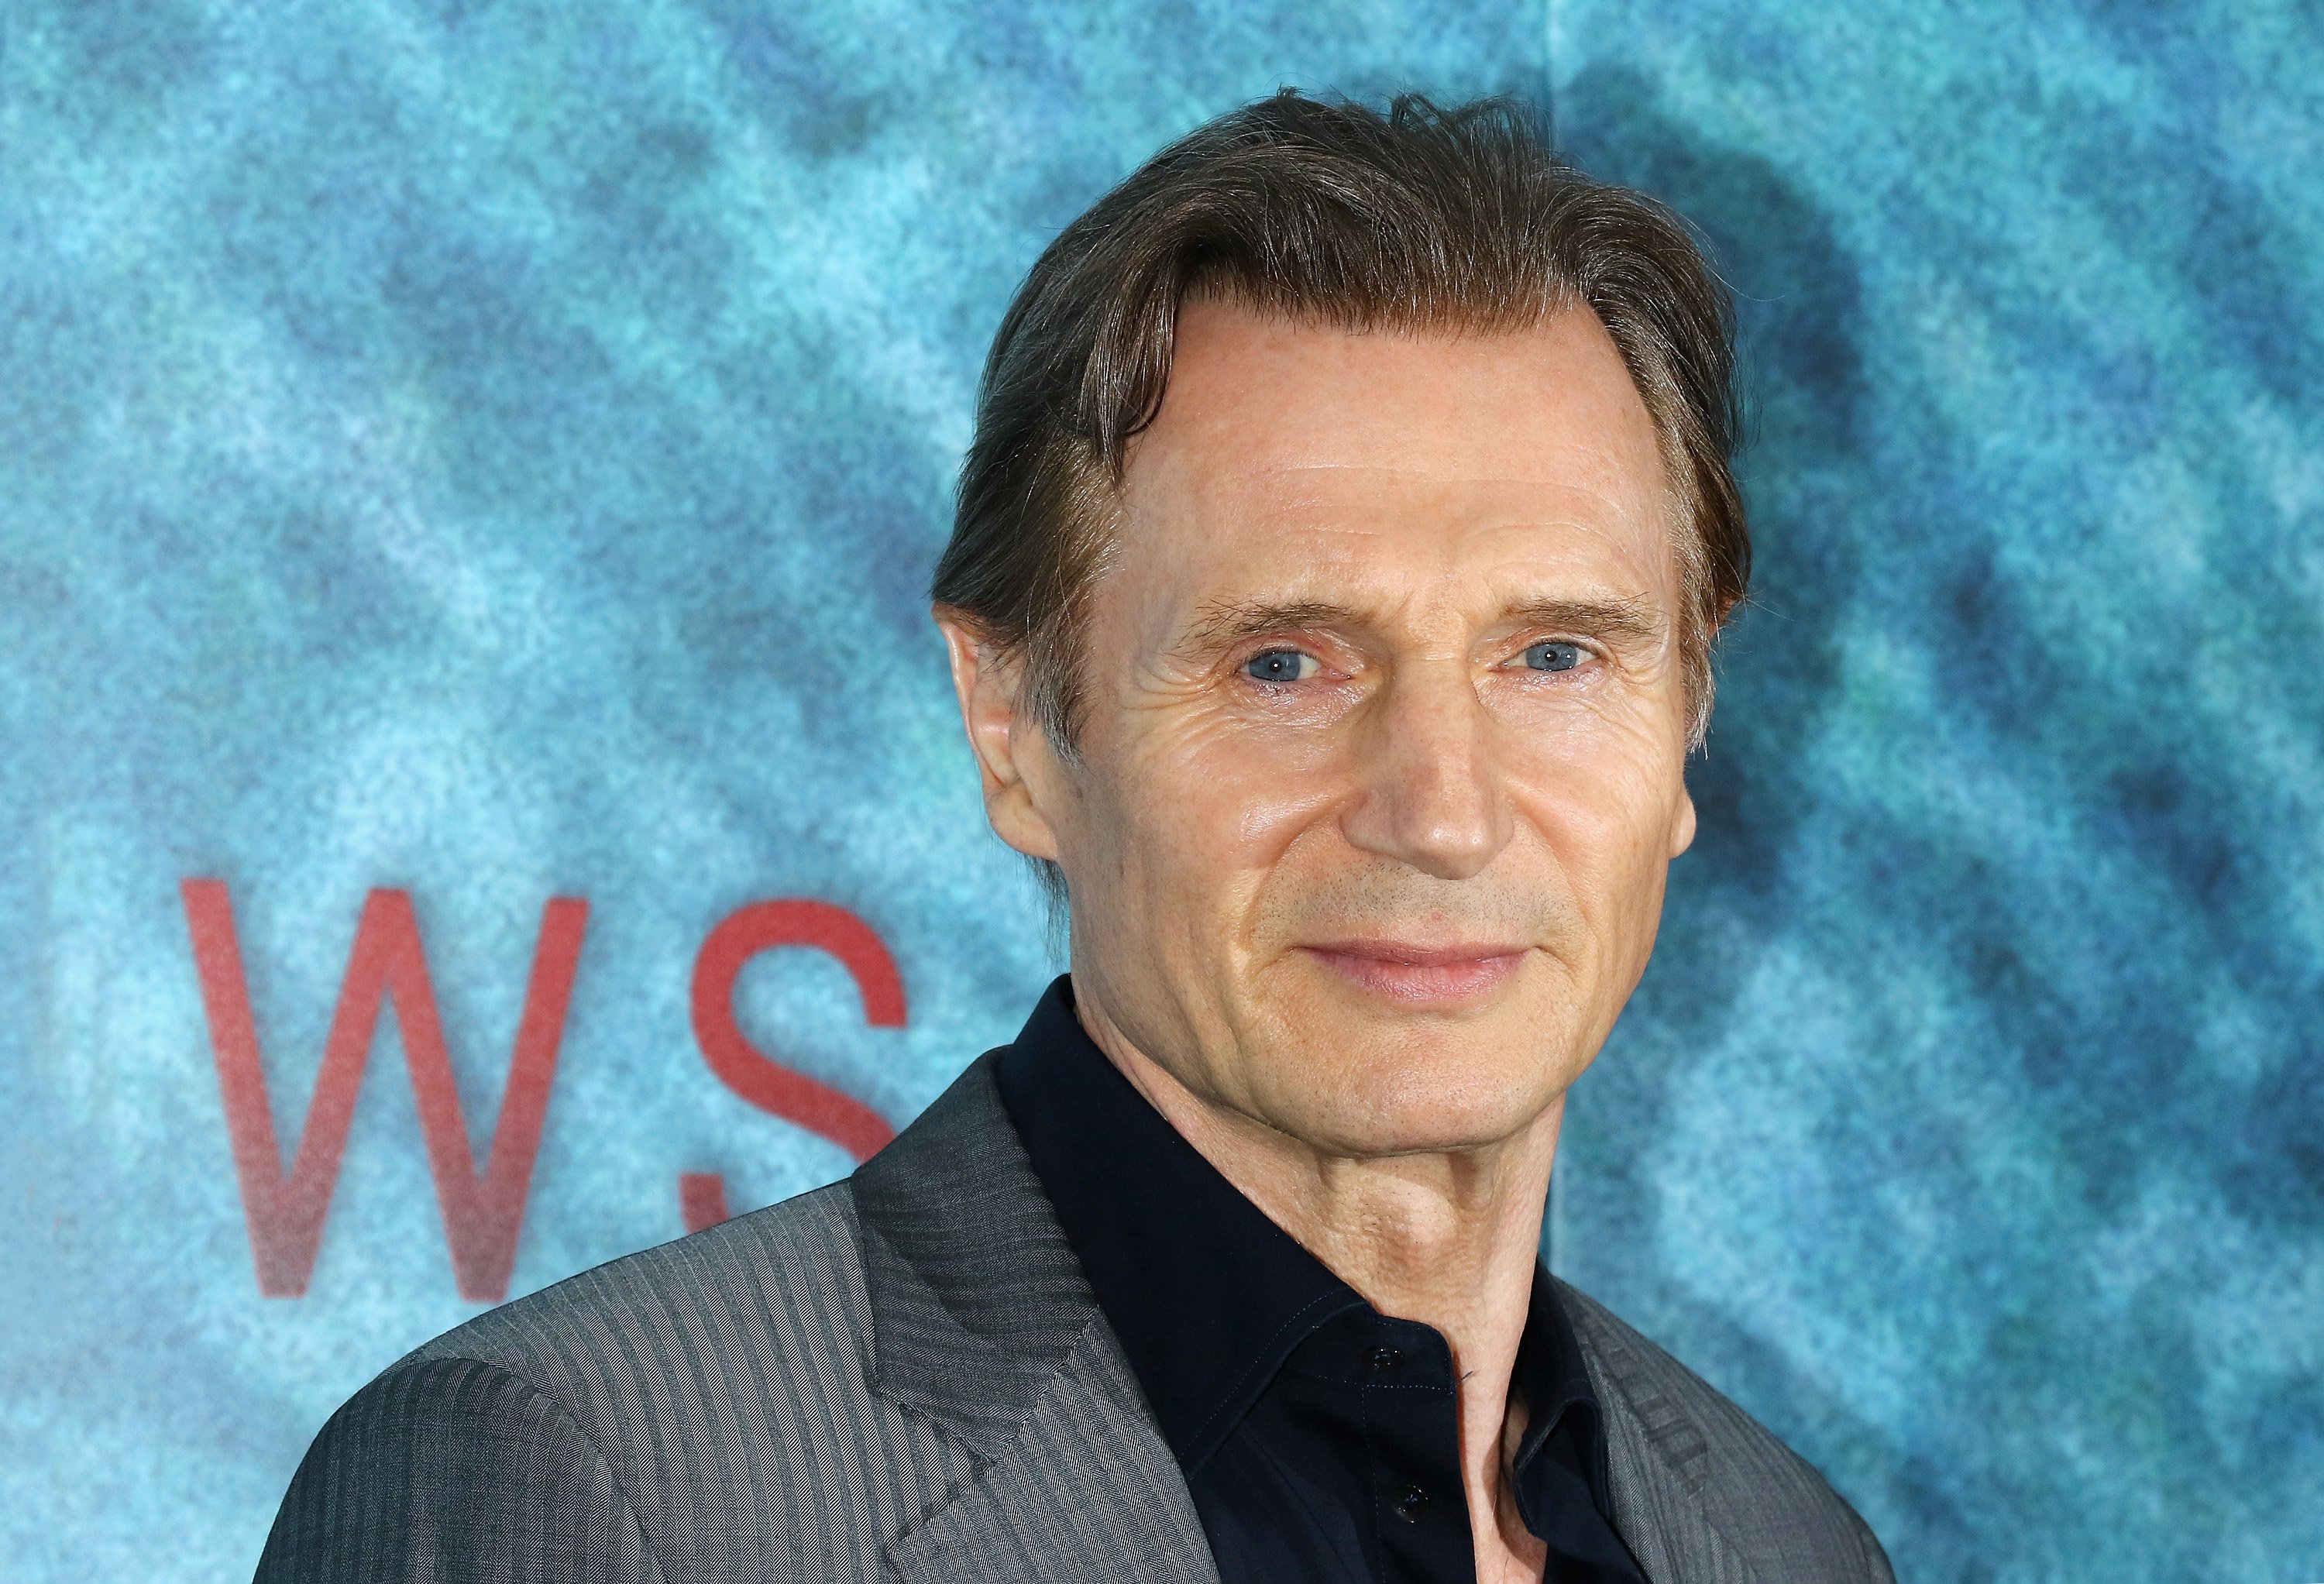 Actor Liam Neeson attends the "The Shallows" world premiere on June 21, 2016 in New York City. | Source: Getty Images